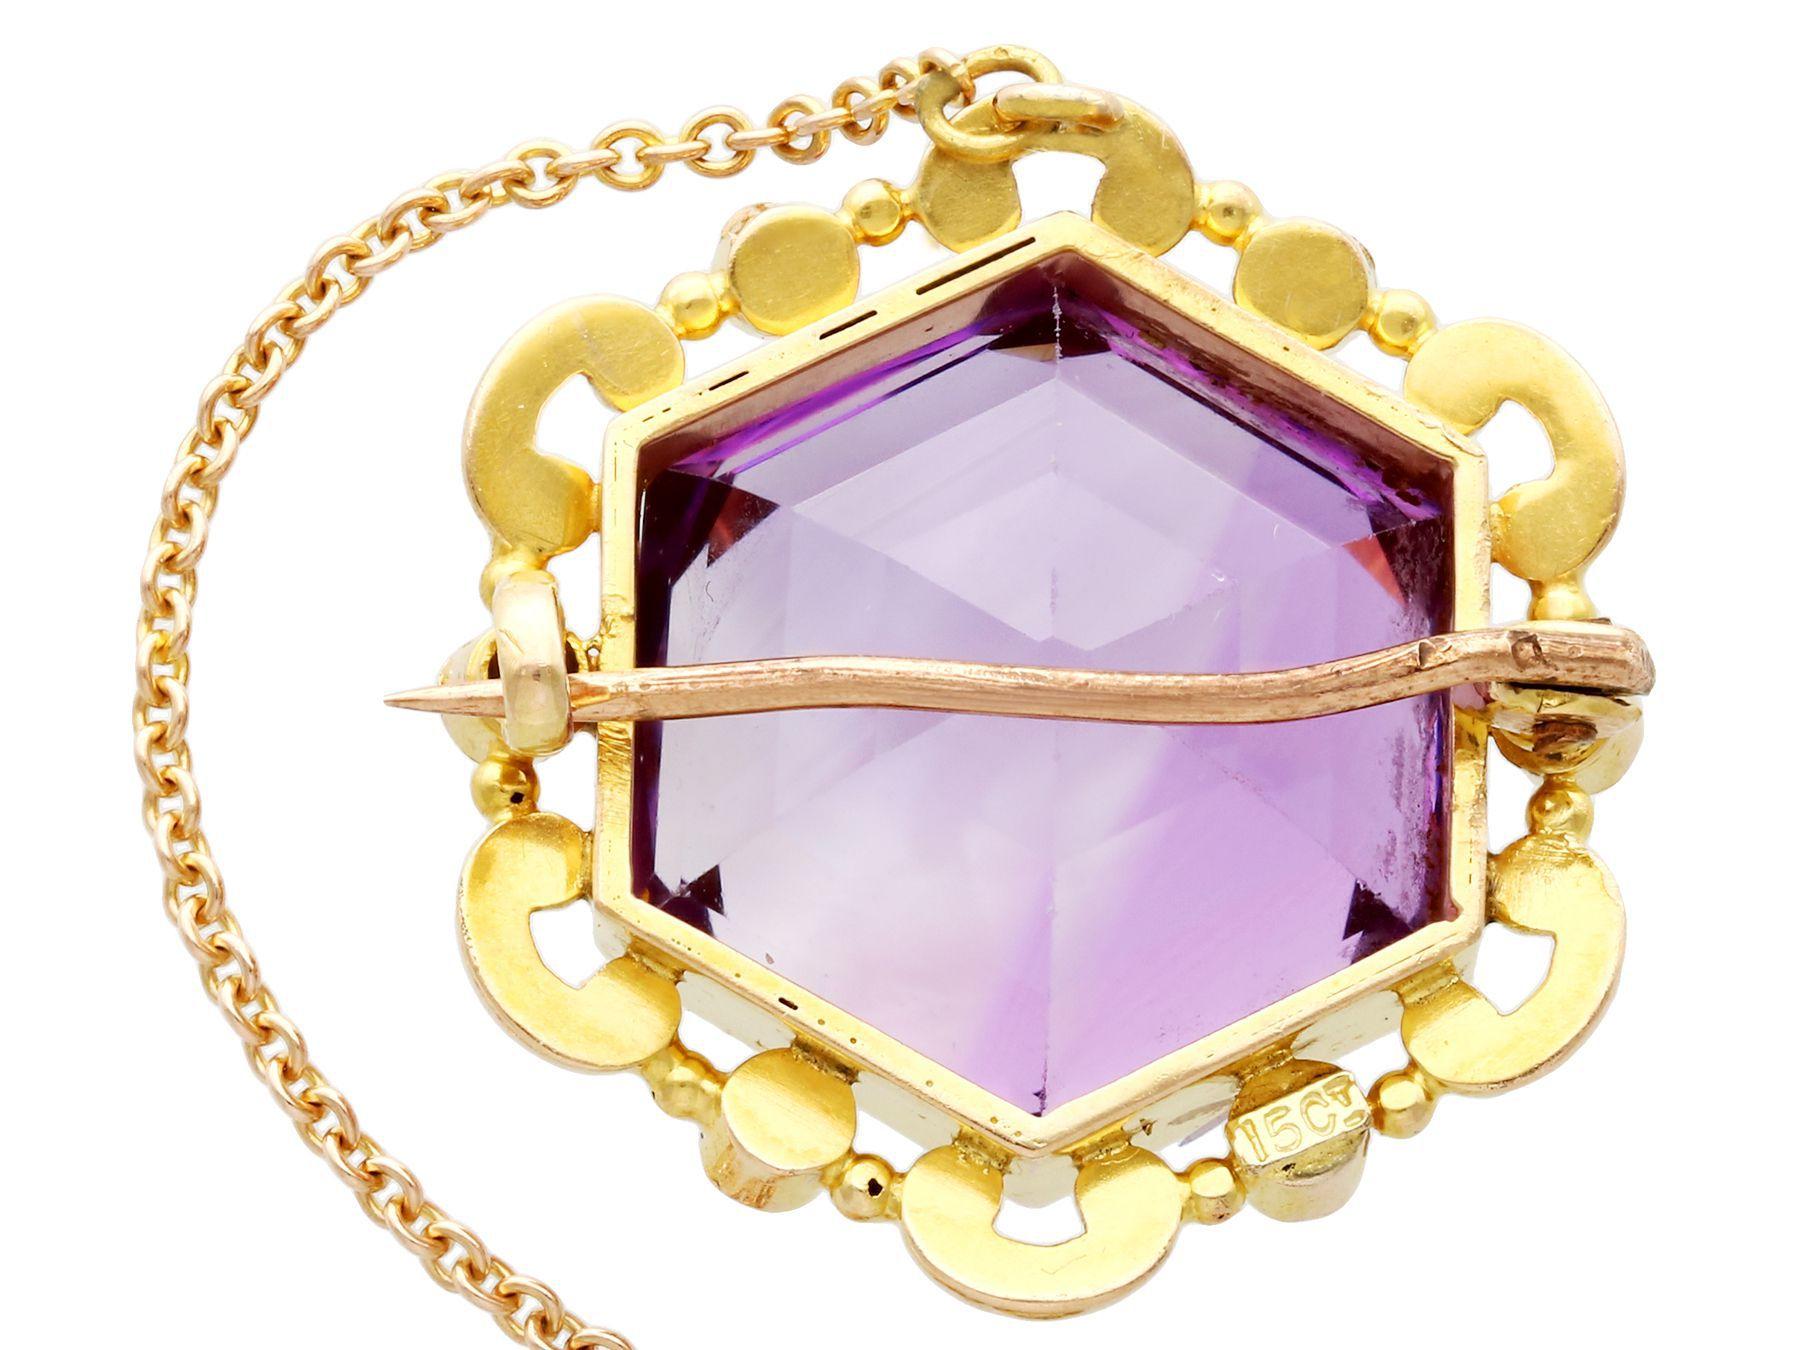 Antique 12.50 Carat Amethyst and Seed Pearl Yellow Gold Brooch, circa 1890 In Excellent Condition For Sale In Jesmond, Newcastle Upon Tyne